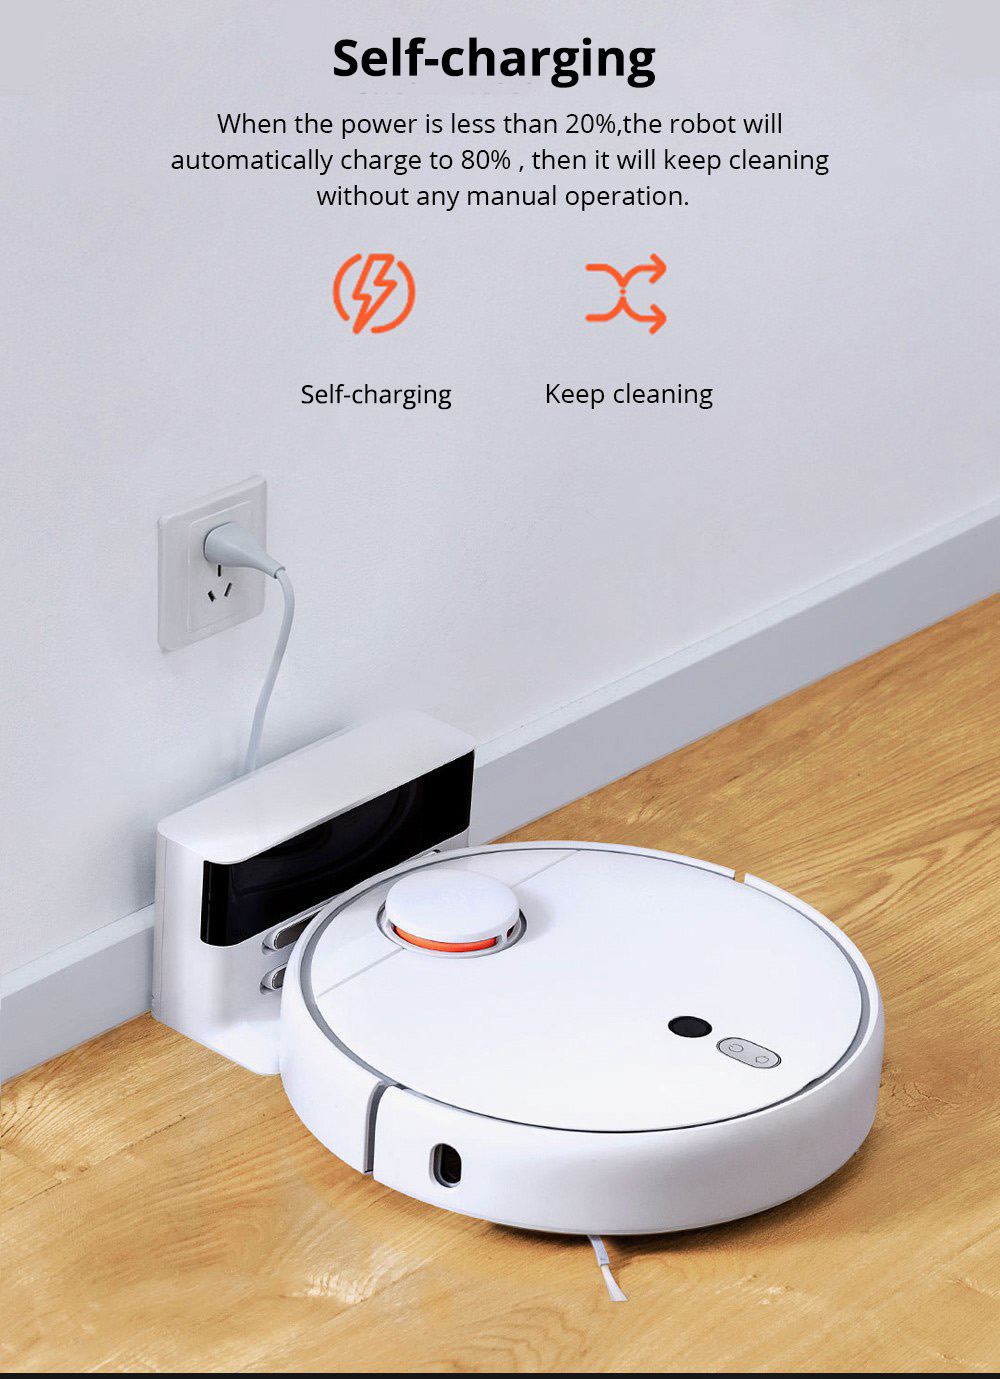 Xiaomi Mijia 1S Robot Vacuum Cleaner LDS + Visual Navigation 2000Pa Suction AI Image Recognition APP Zoned Cleaning Virtual Wall 5200mAh - White